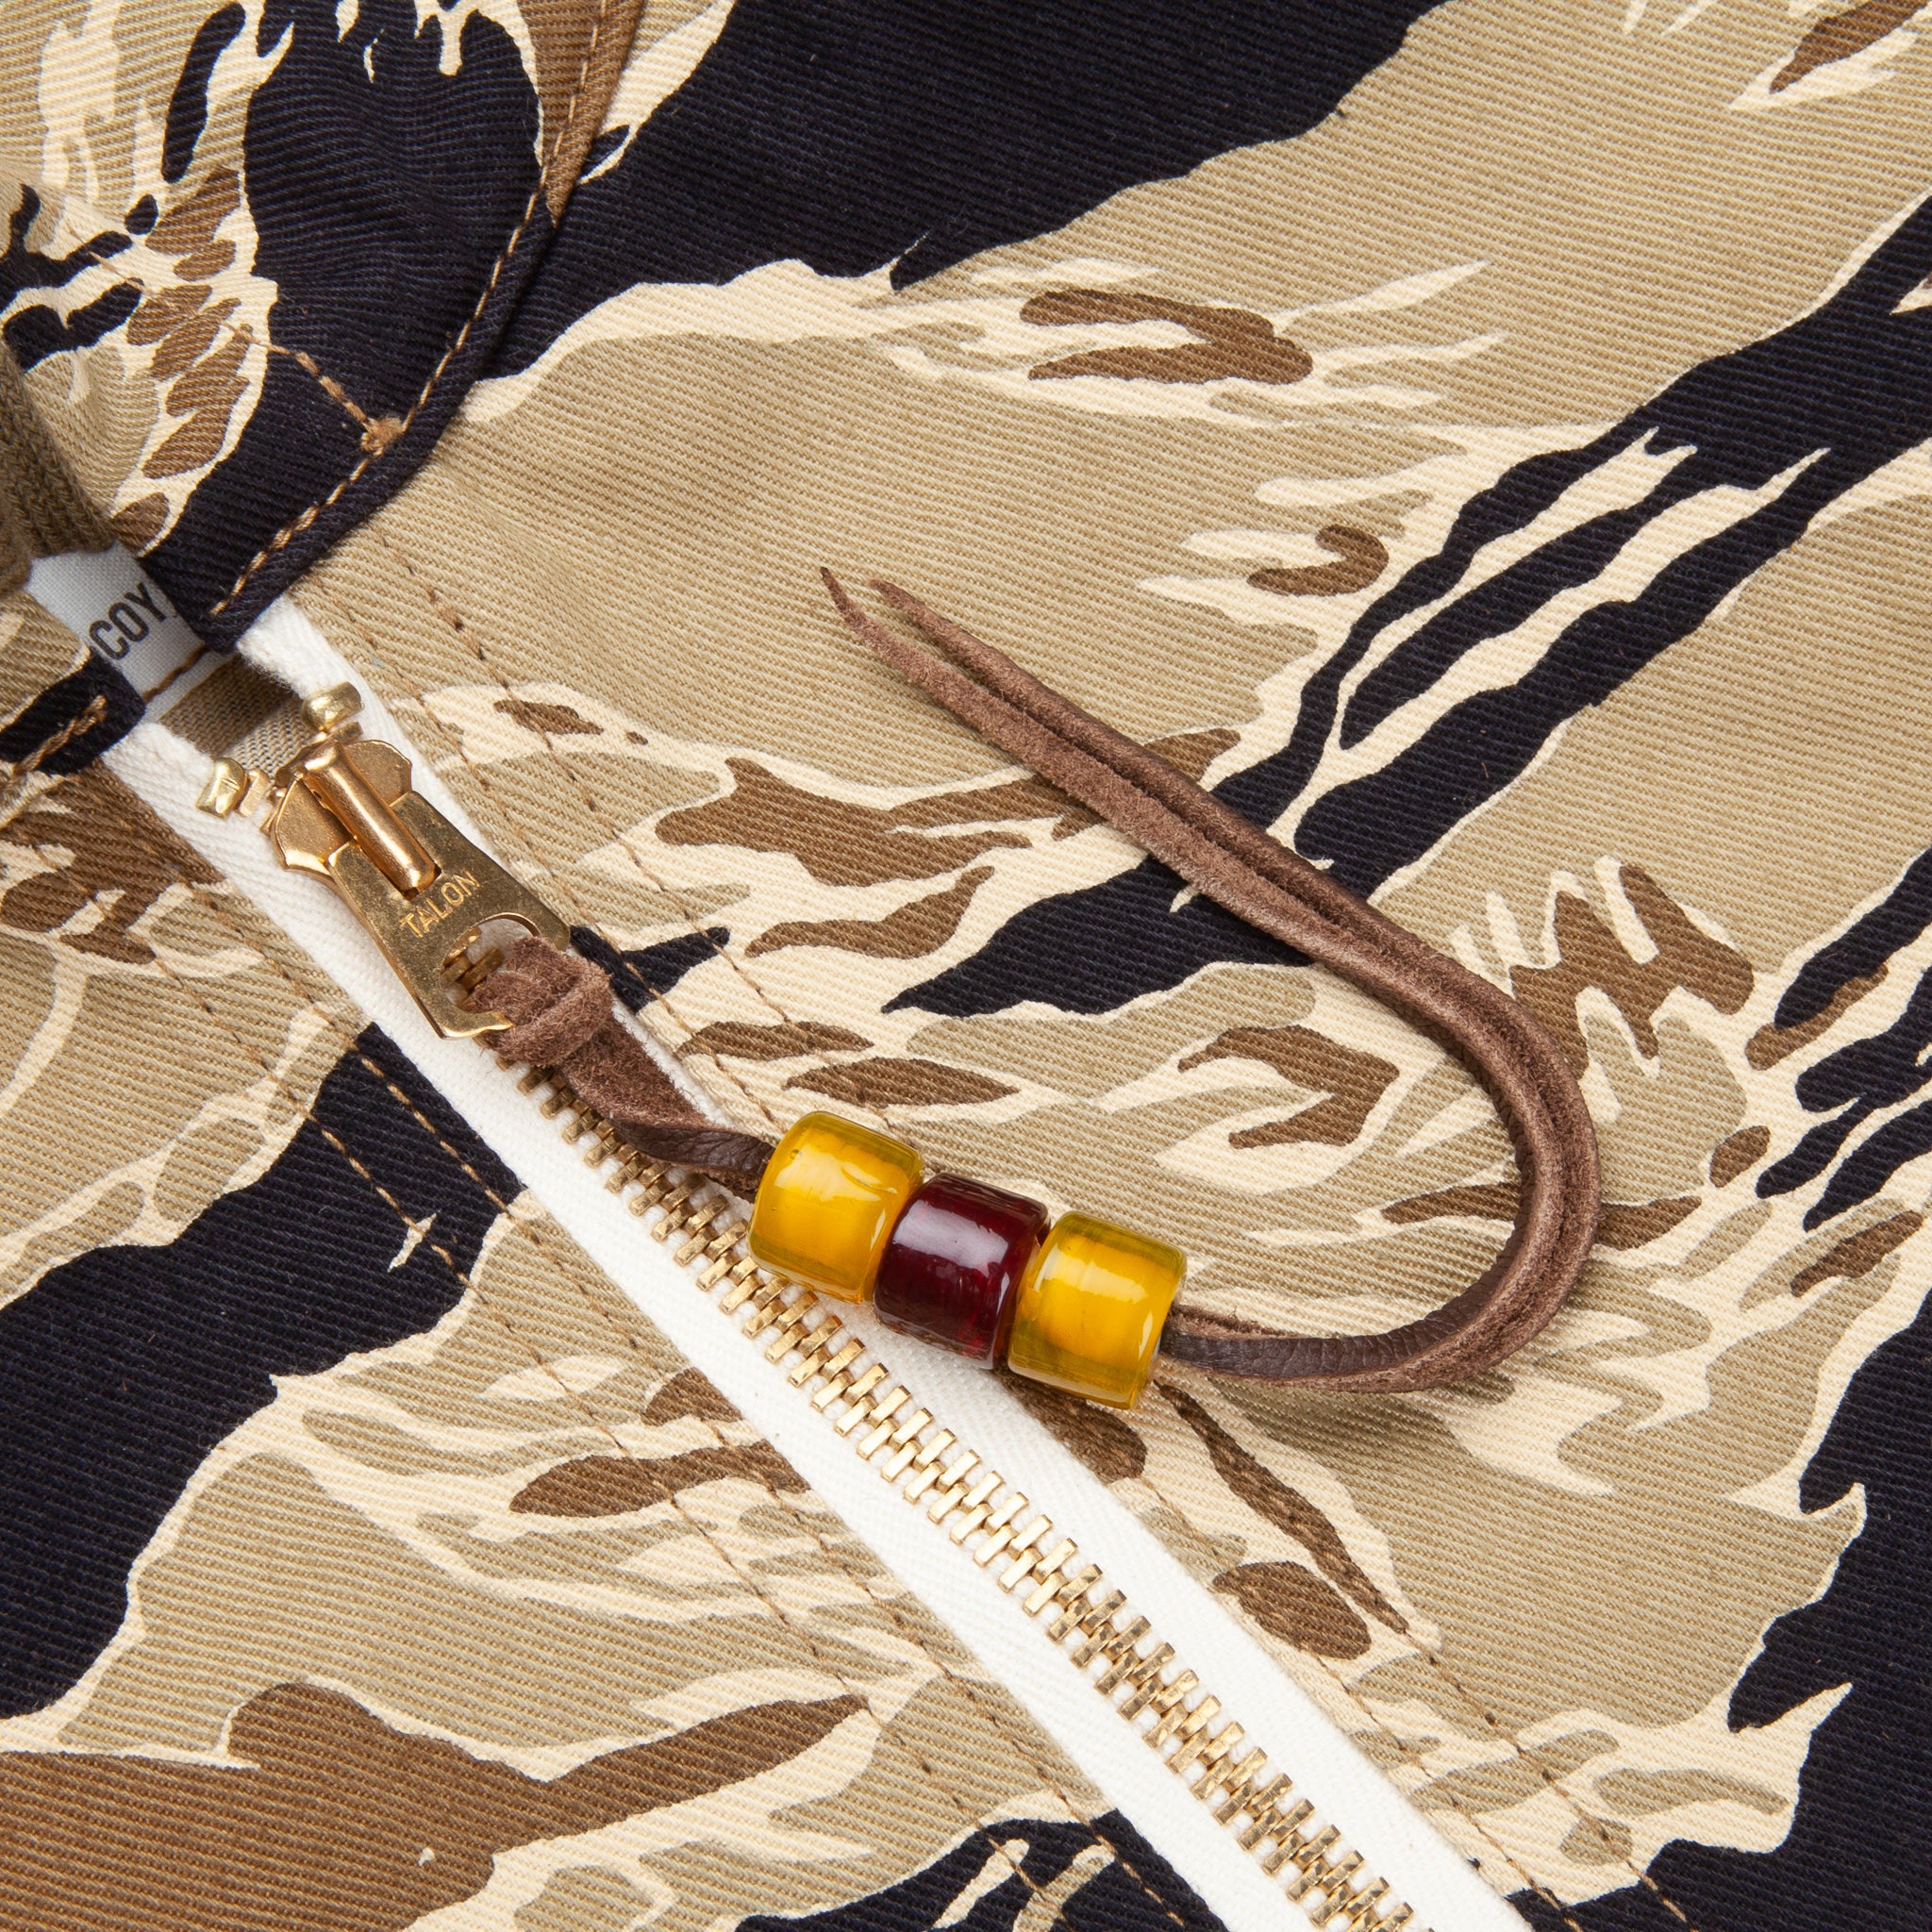 The Real McCoy&#39;s Tiger Camouflage Parka Gold tone